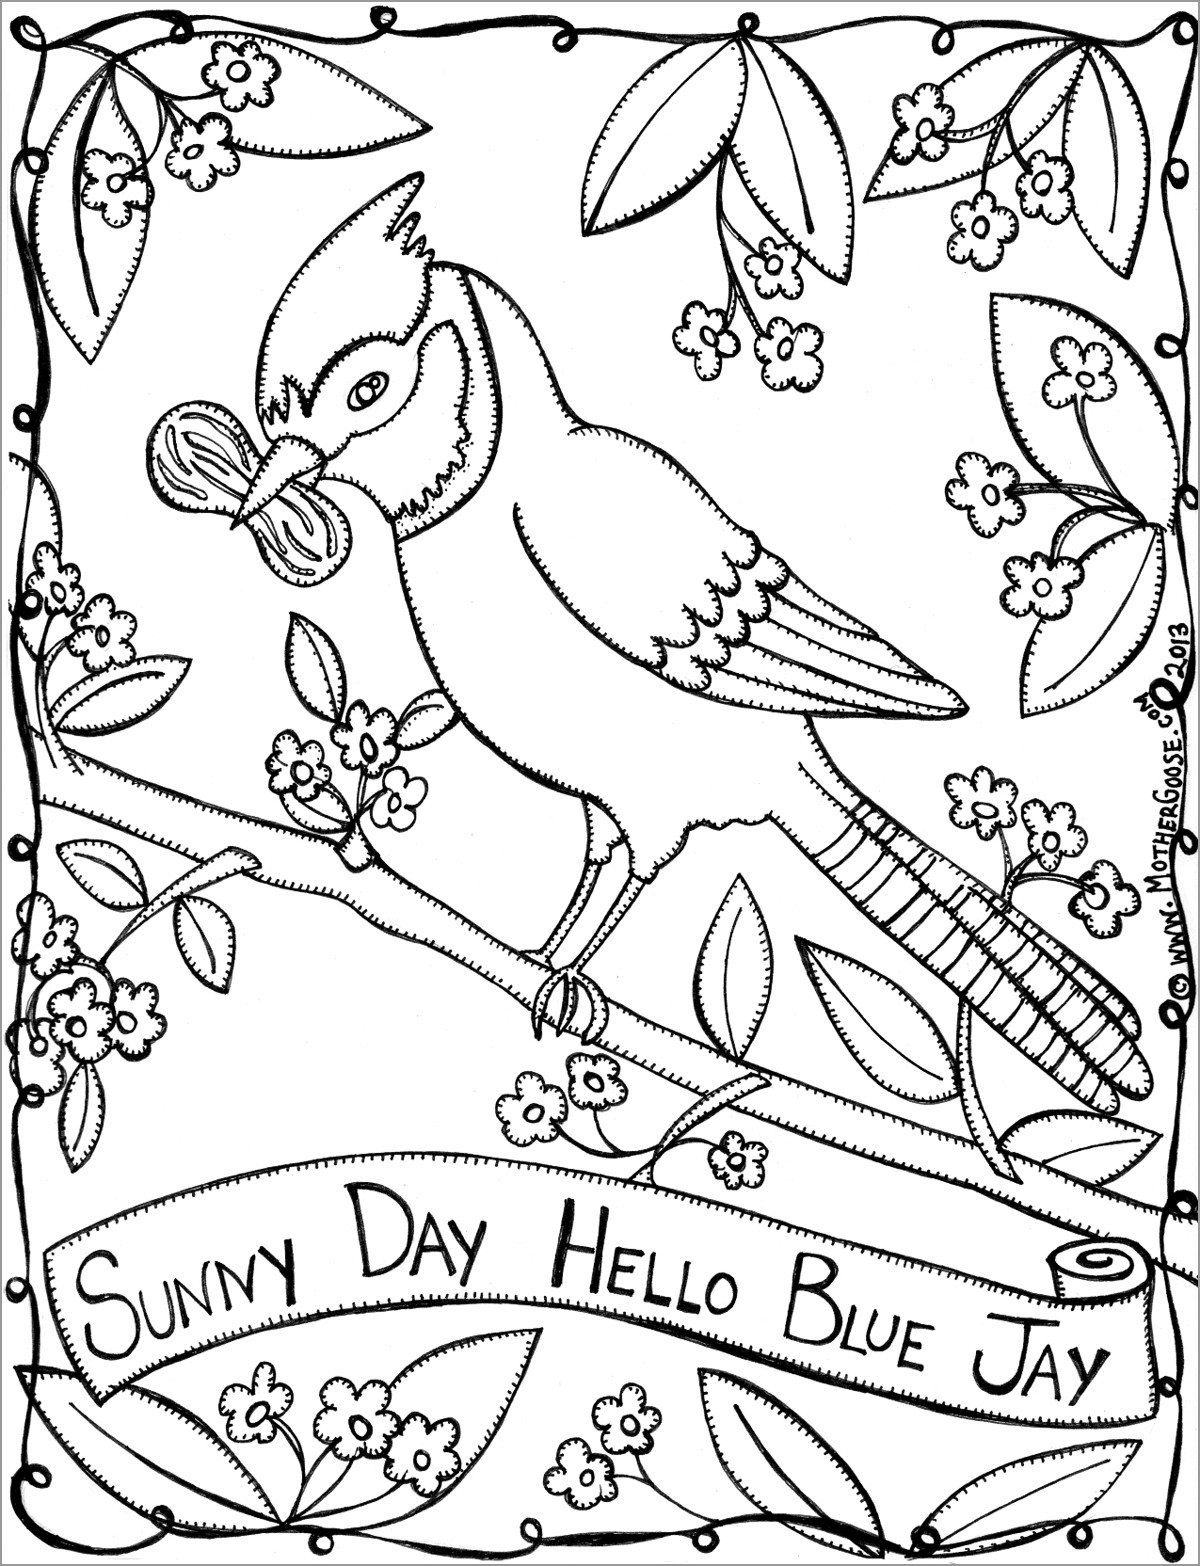 Sunny Day Jay Coloring Page